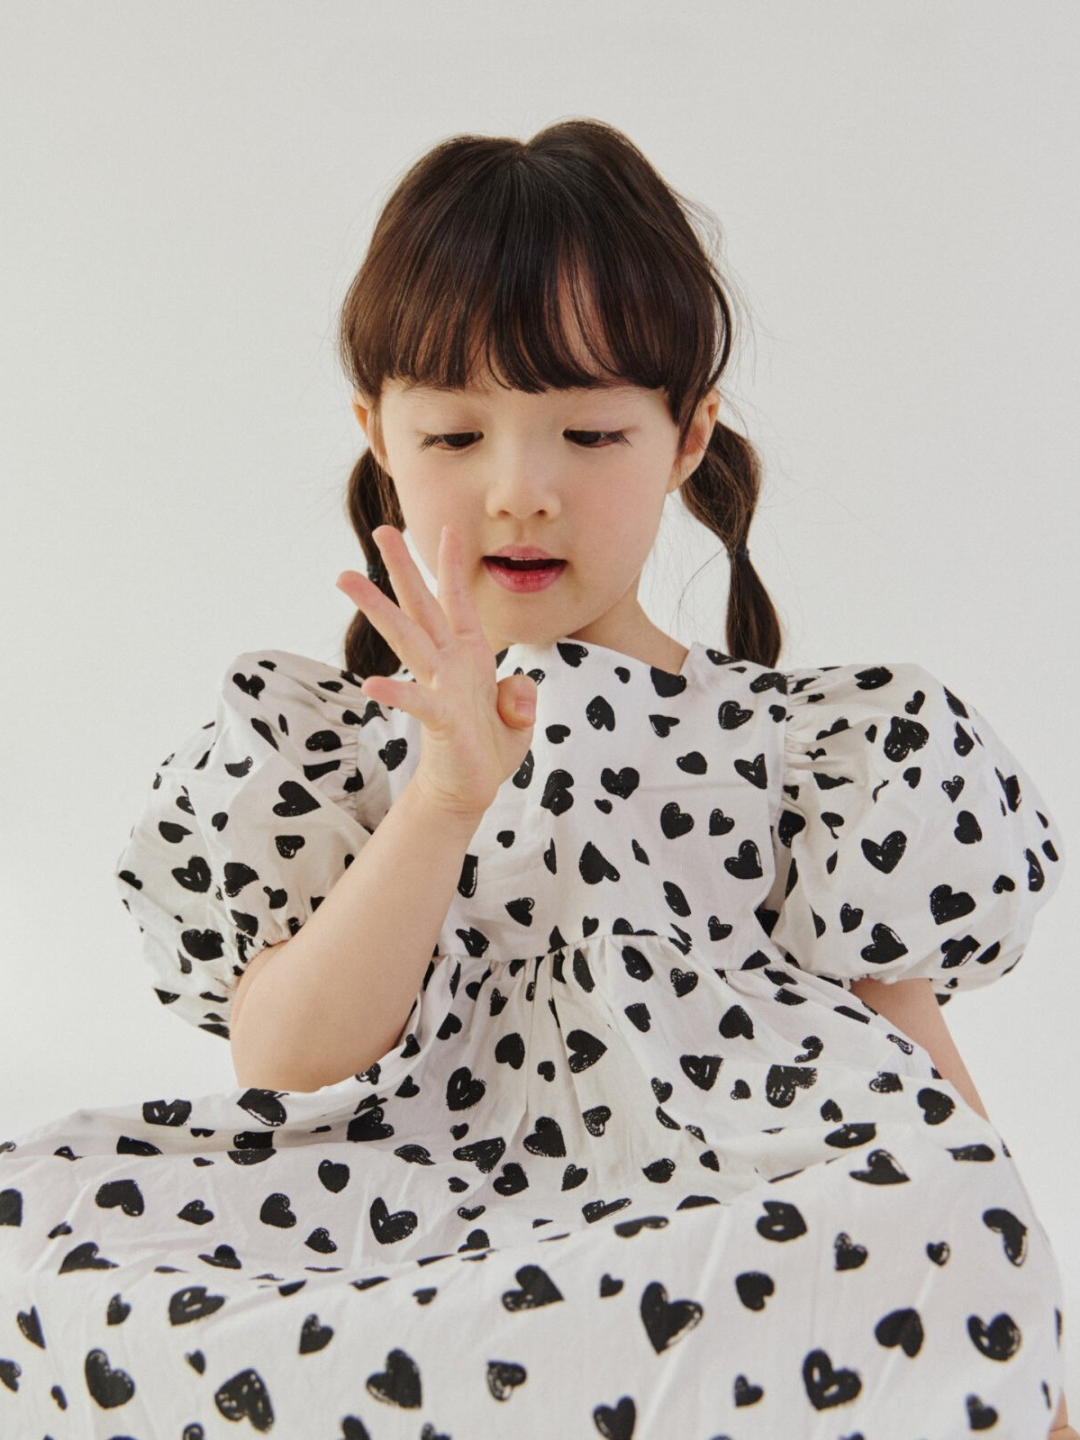 Seated child wearing a kids' puff-sleeved dress in a pattern of black hearts on a white background